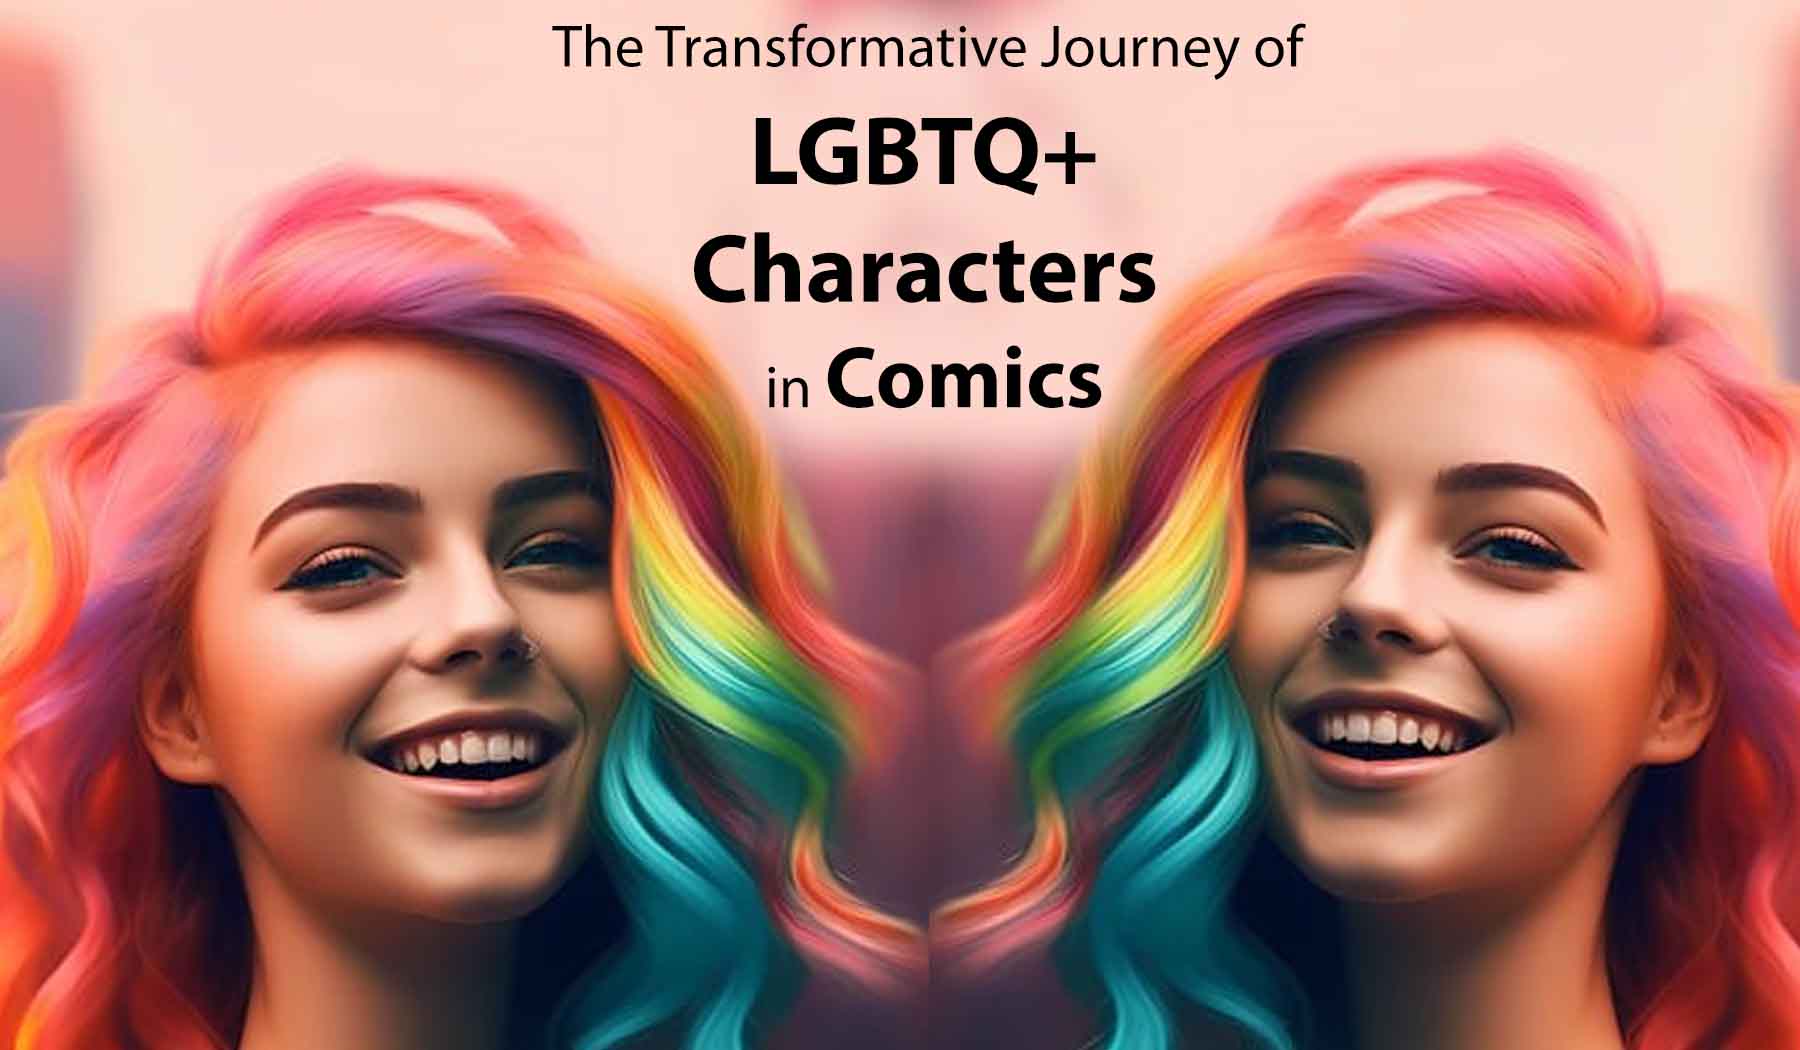 The Transformative Journey of LGBTQ+ Characters in Comics